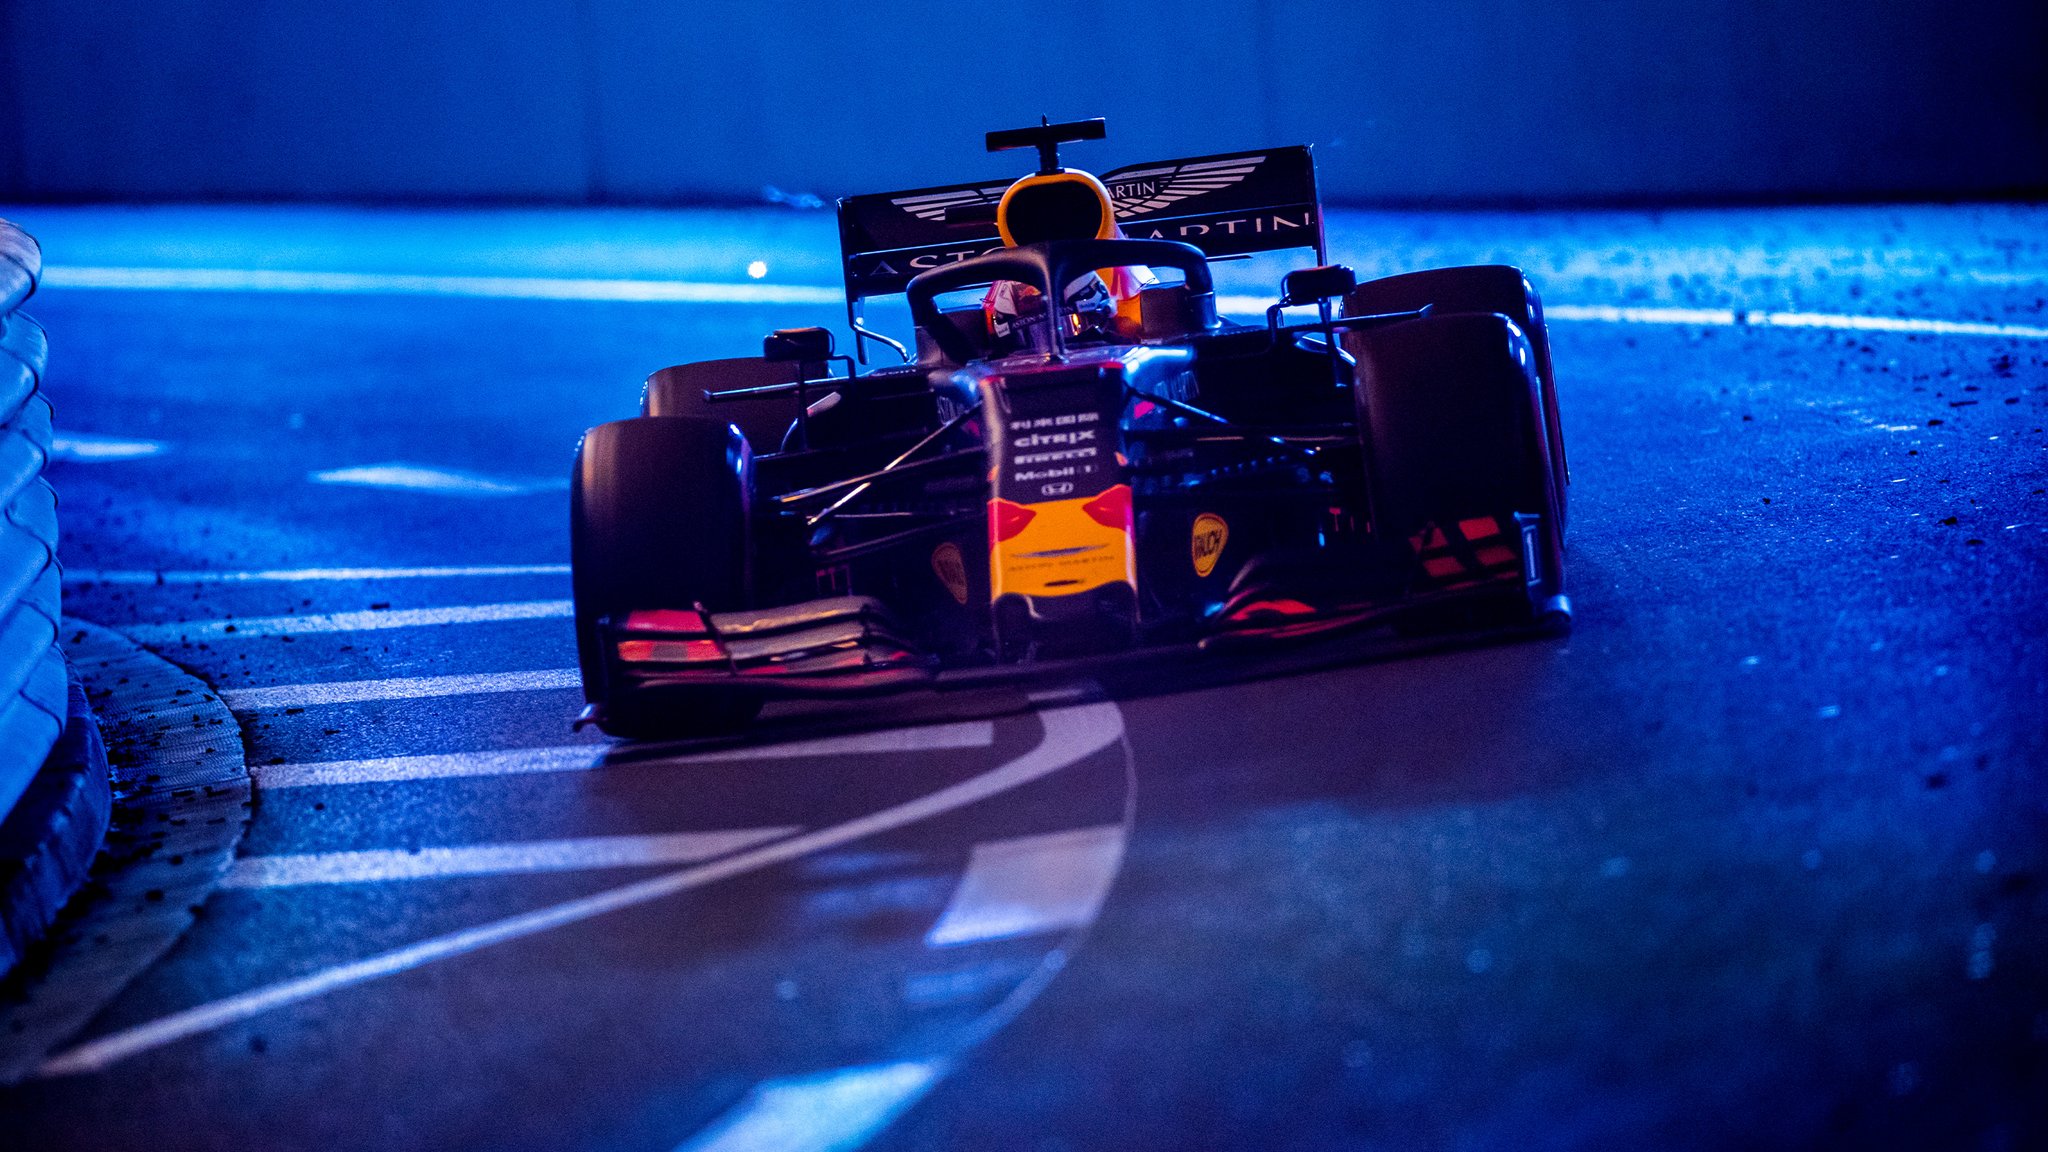 Oracle Red Bull Racing Top Of The Shots Our First Pick From A Stunning Selection Captured In 19 T Co 5kjtfgophw F1 T Co Rzig4jy6pw Twitter